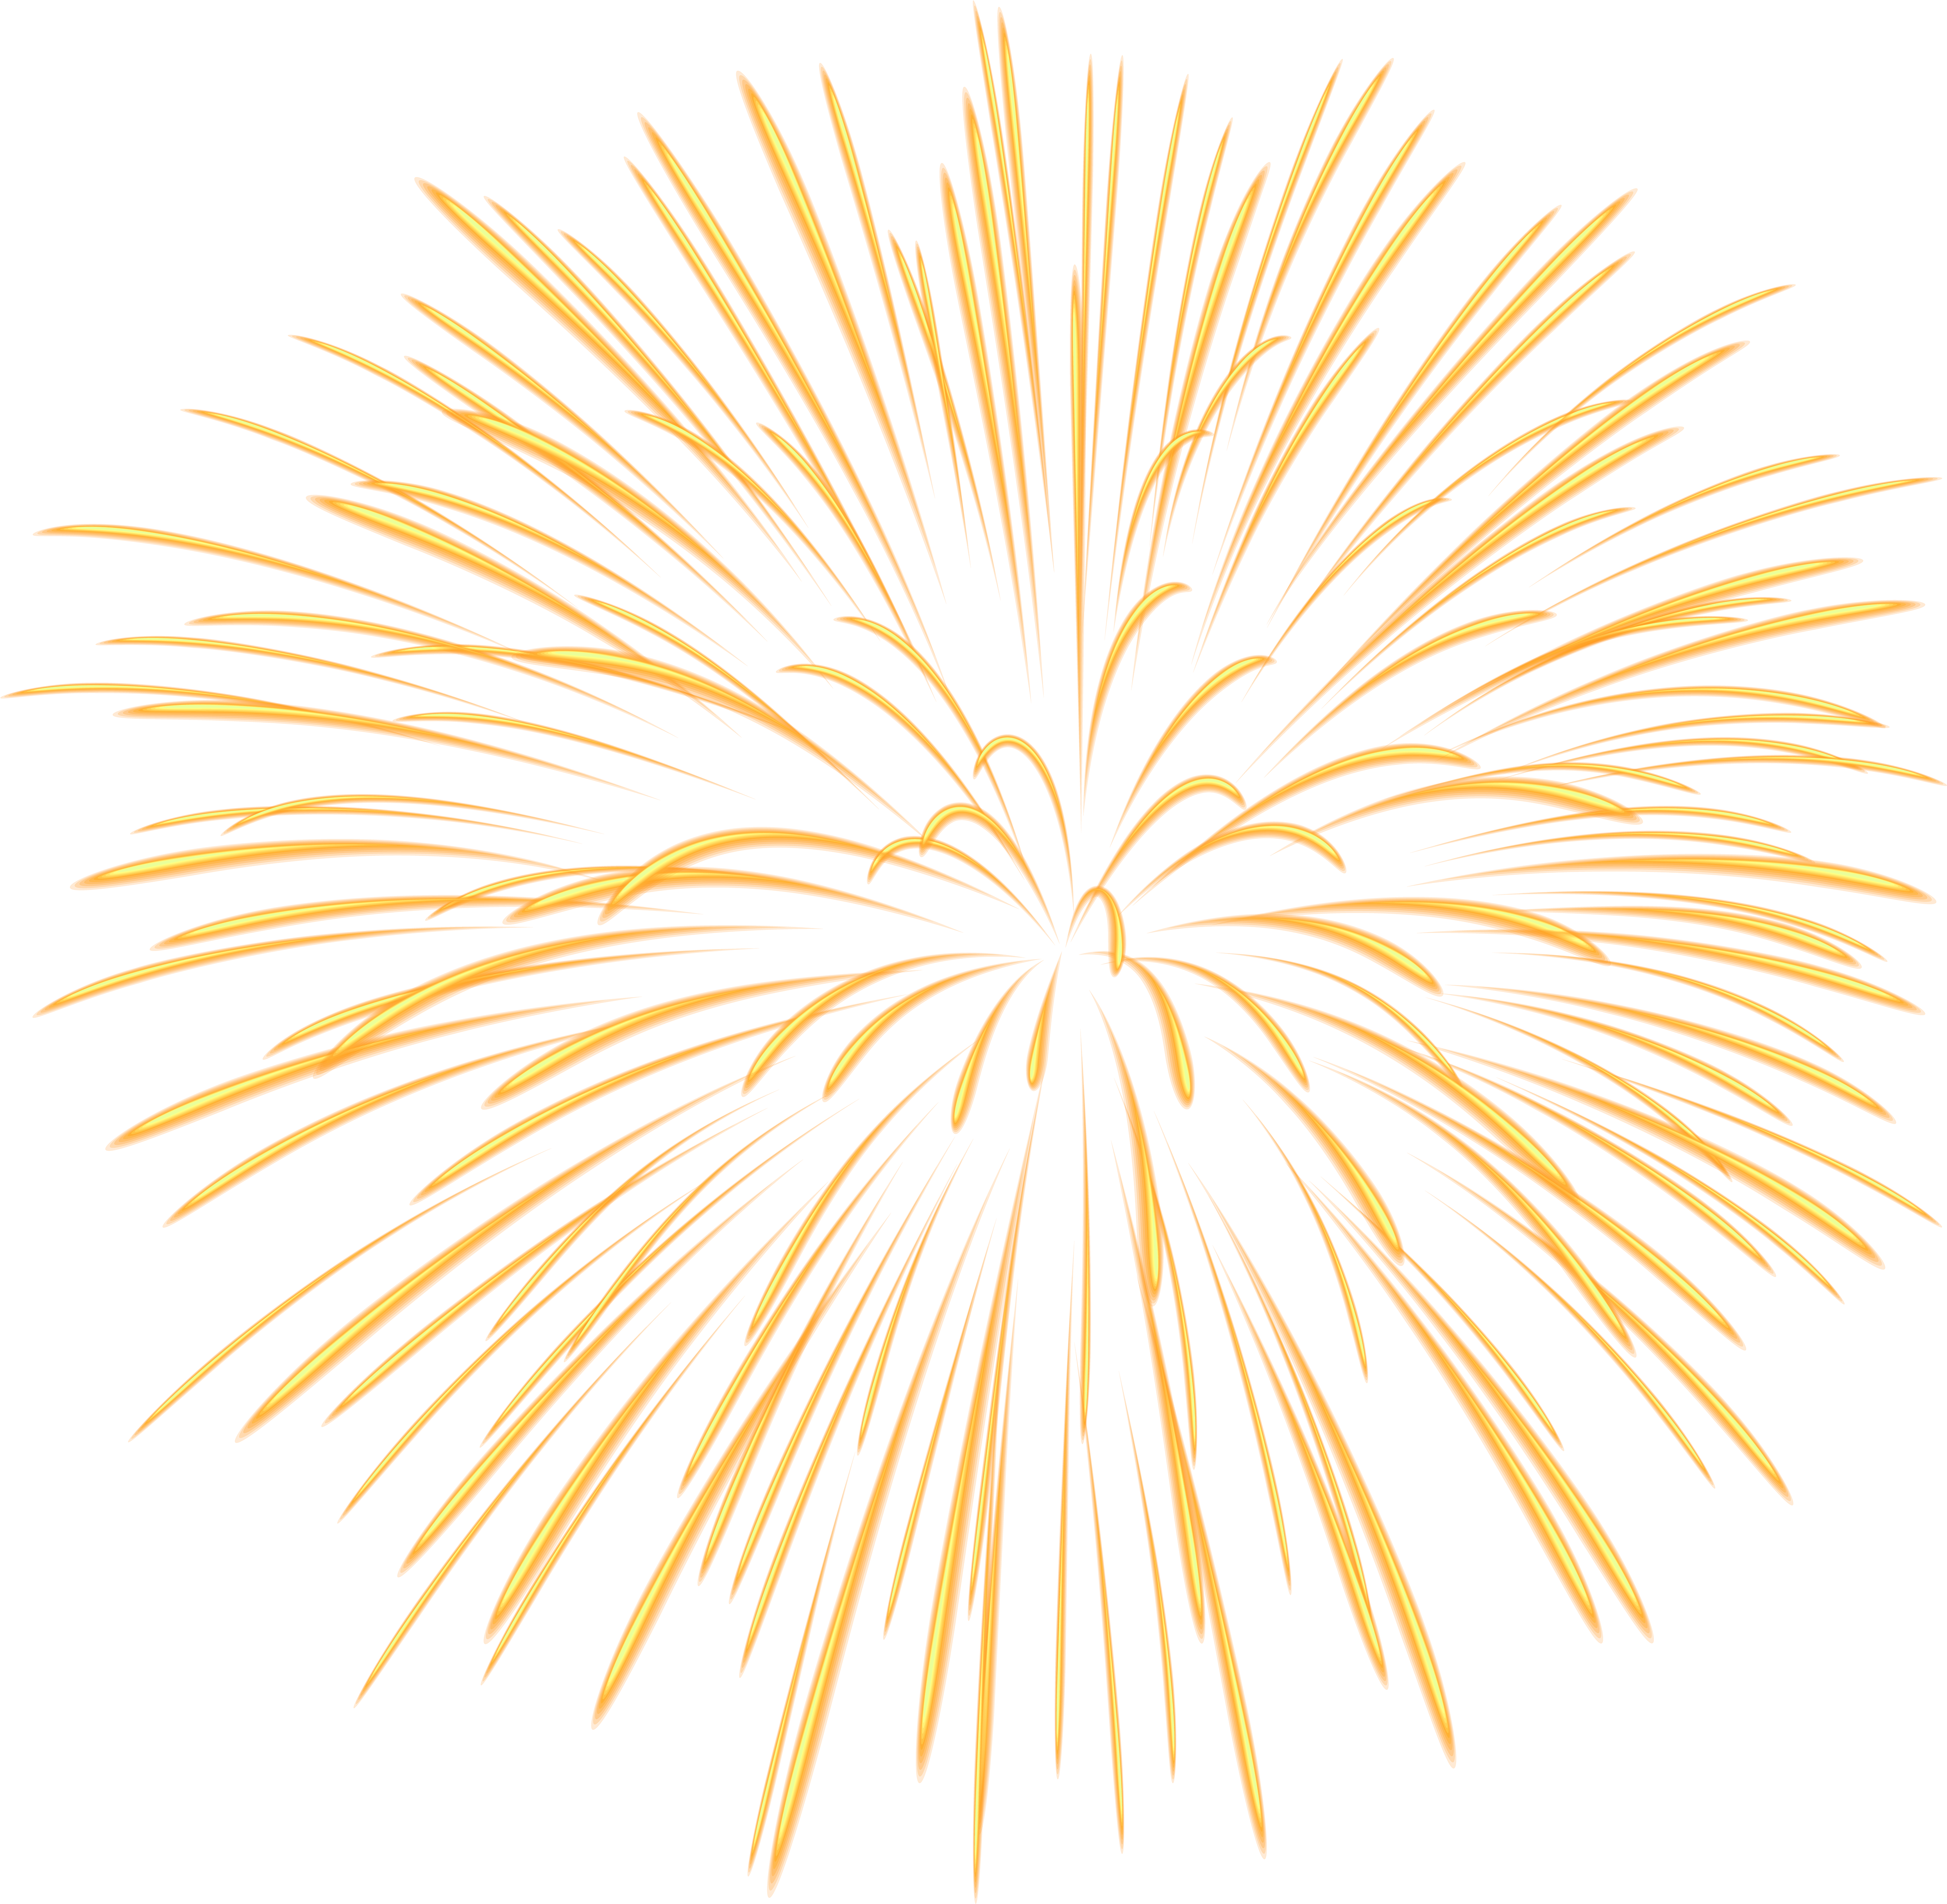 Portable Network Graphics Clip art Transparency Fireworks.